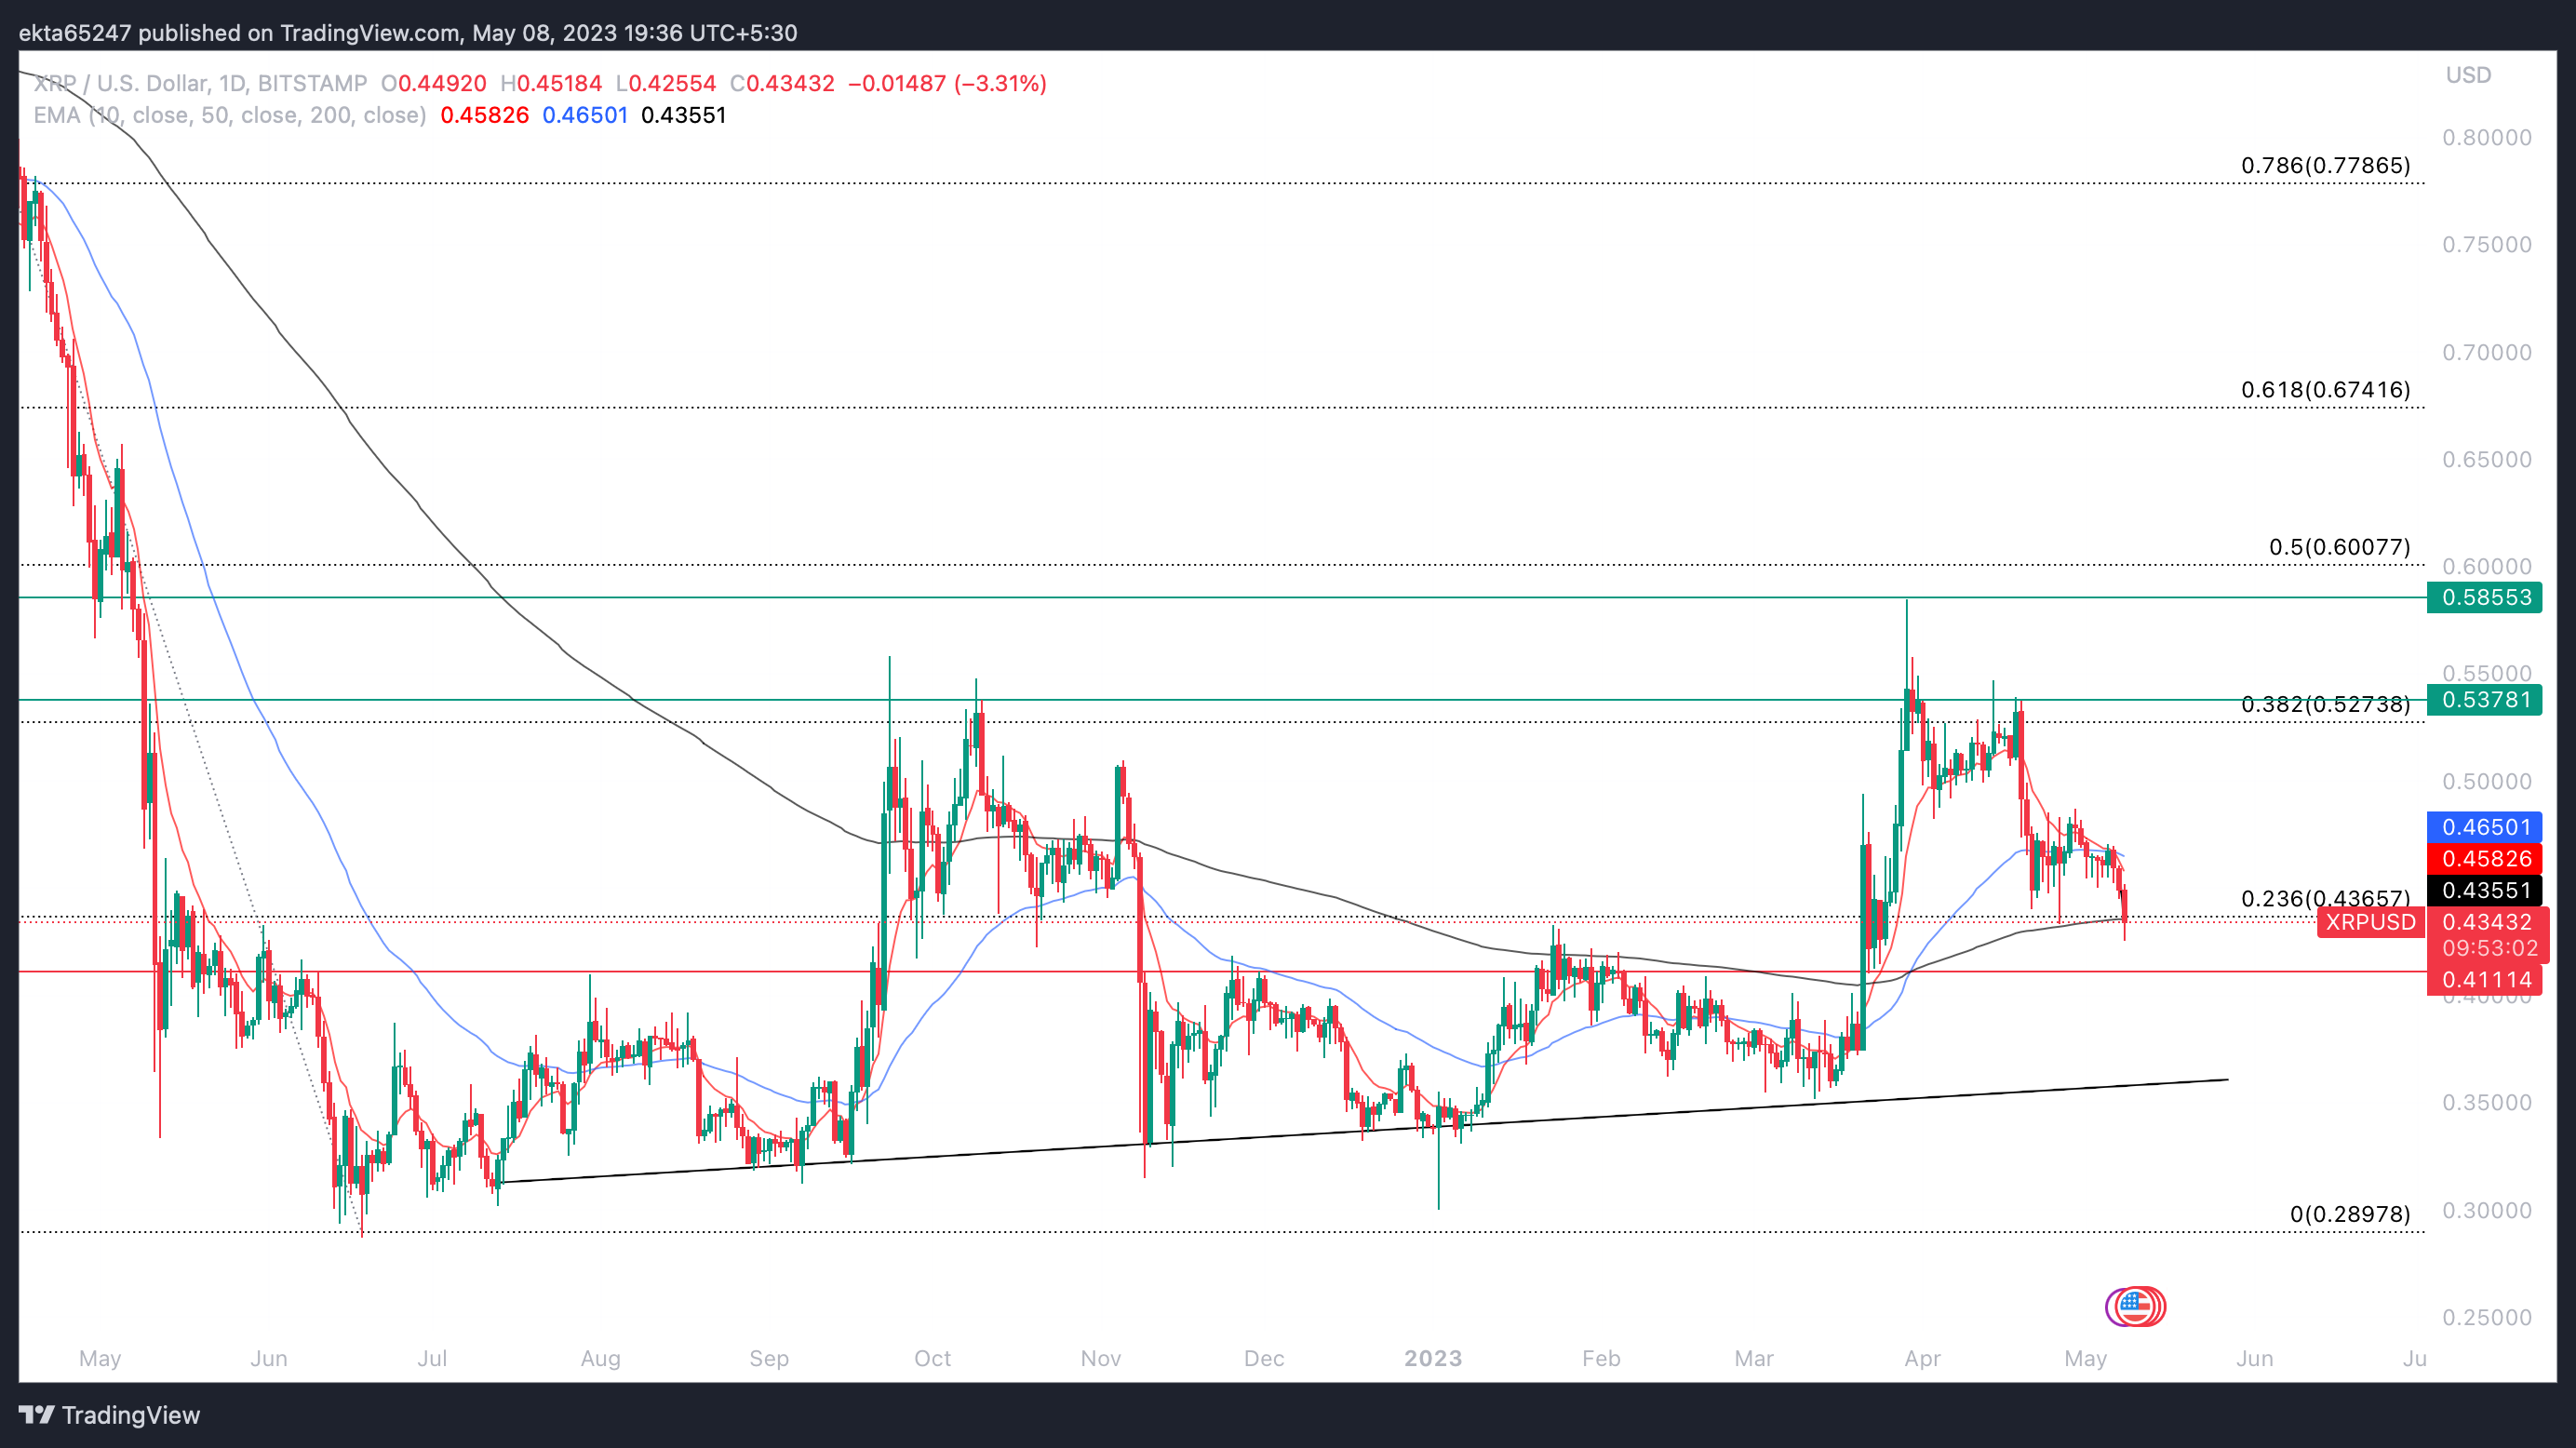 XRP/USD daily price chart